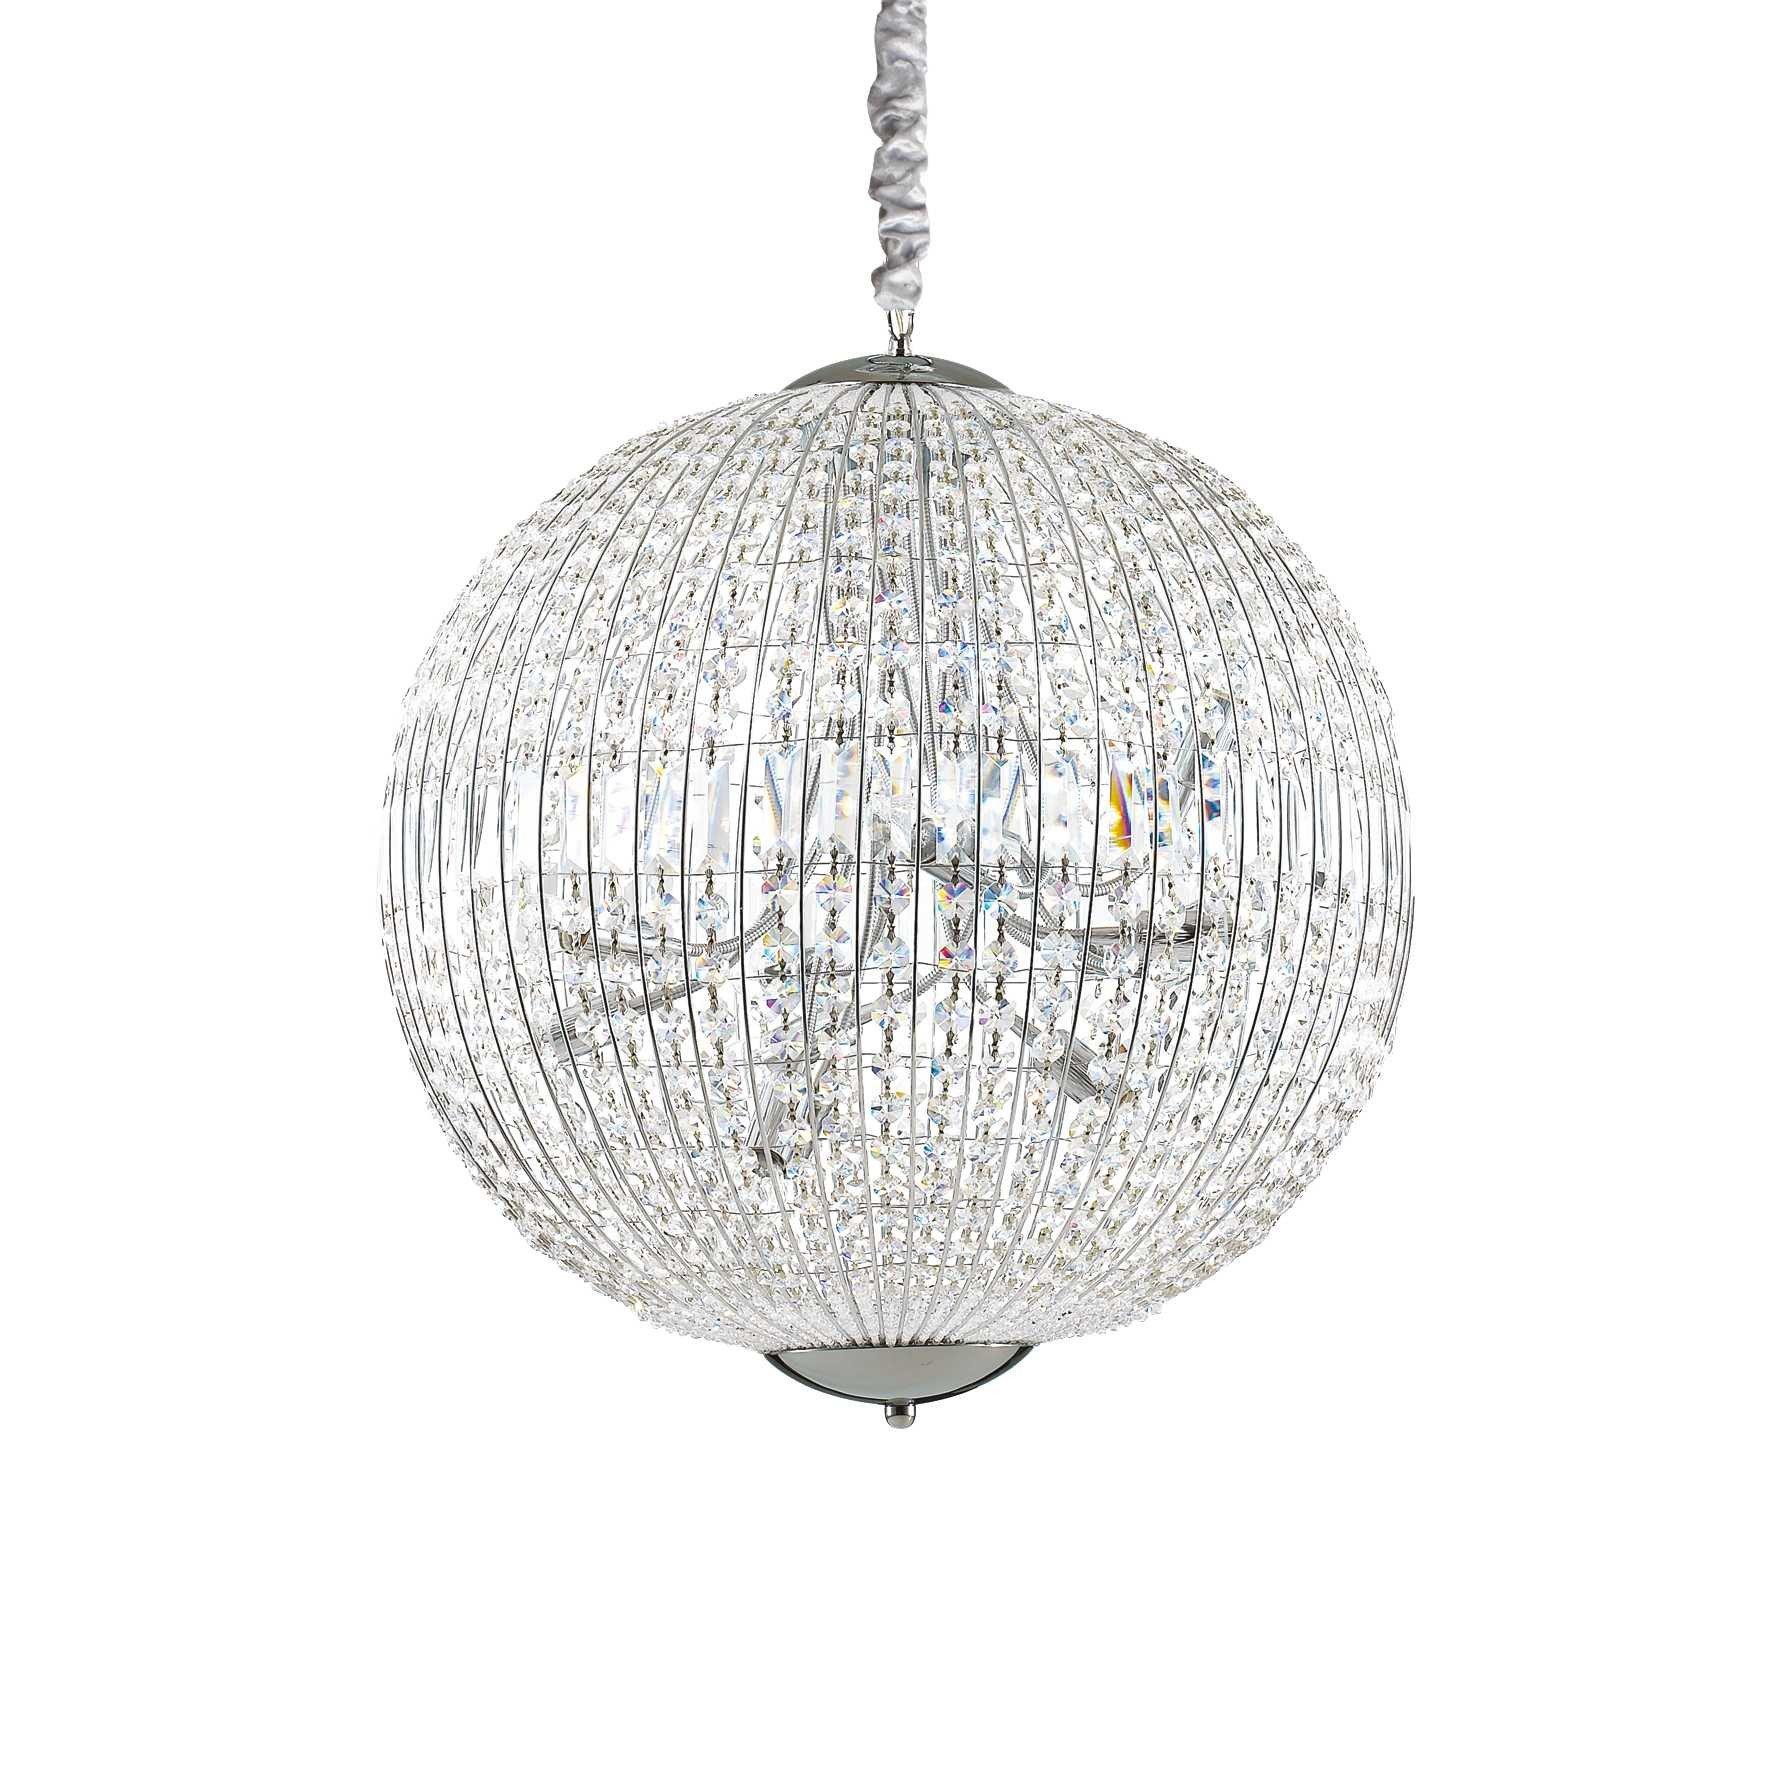 Luxor 12 Light Large Ceiling Pendant Chrome with Crystals G9